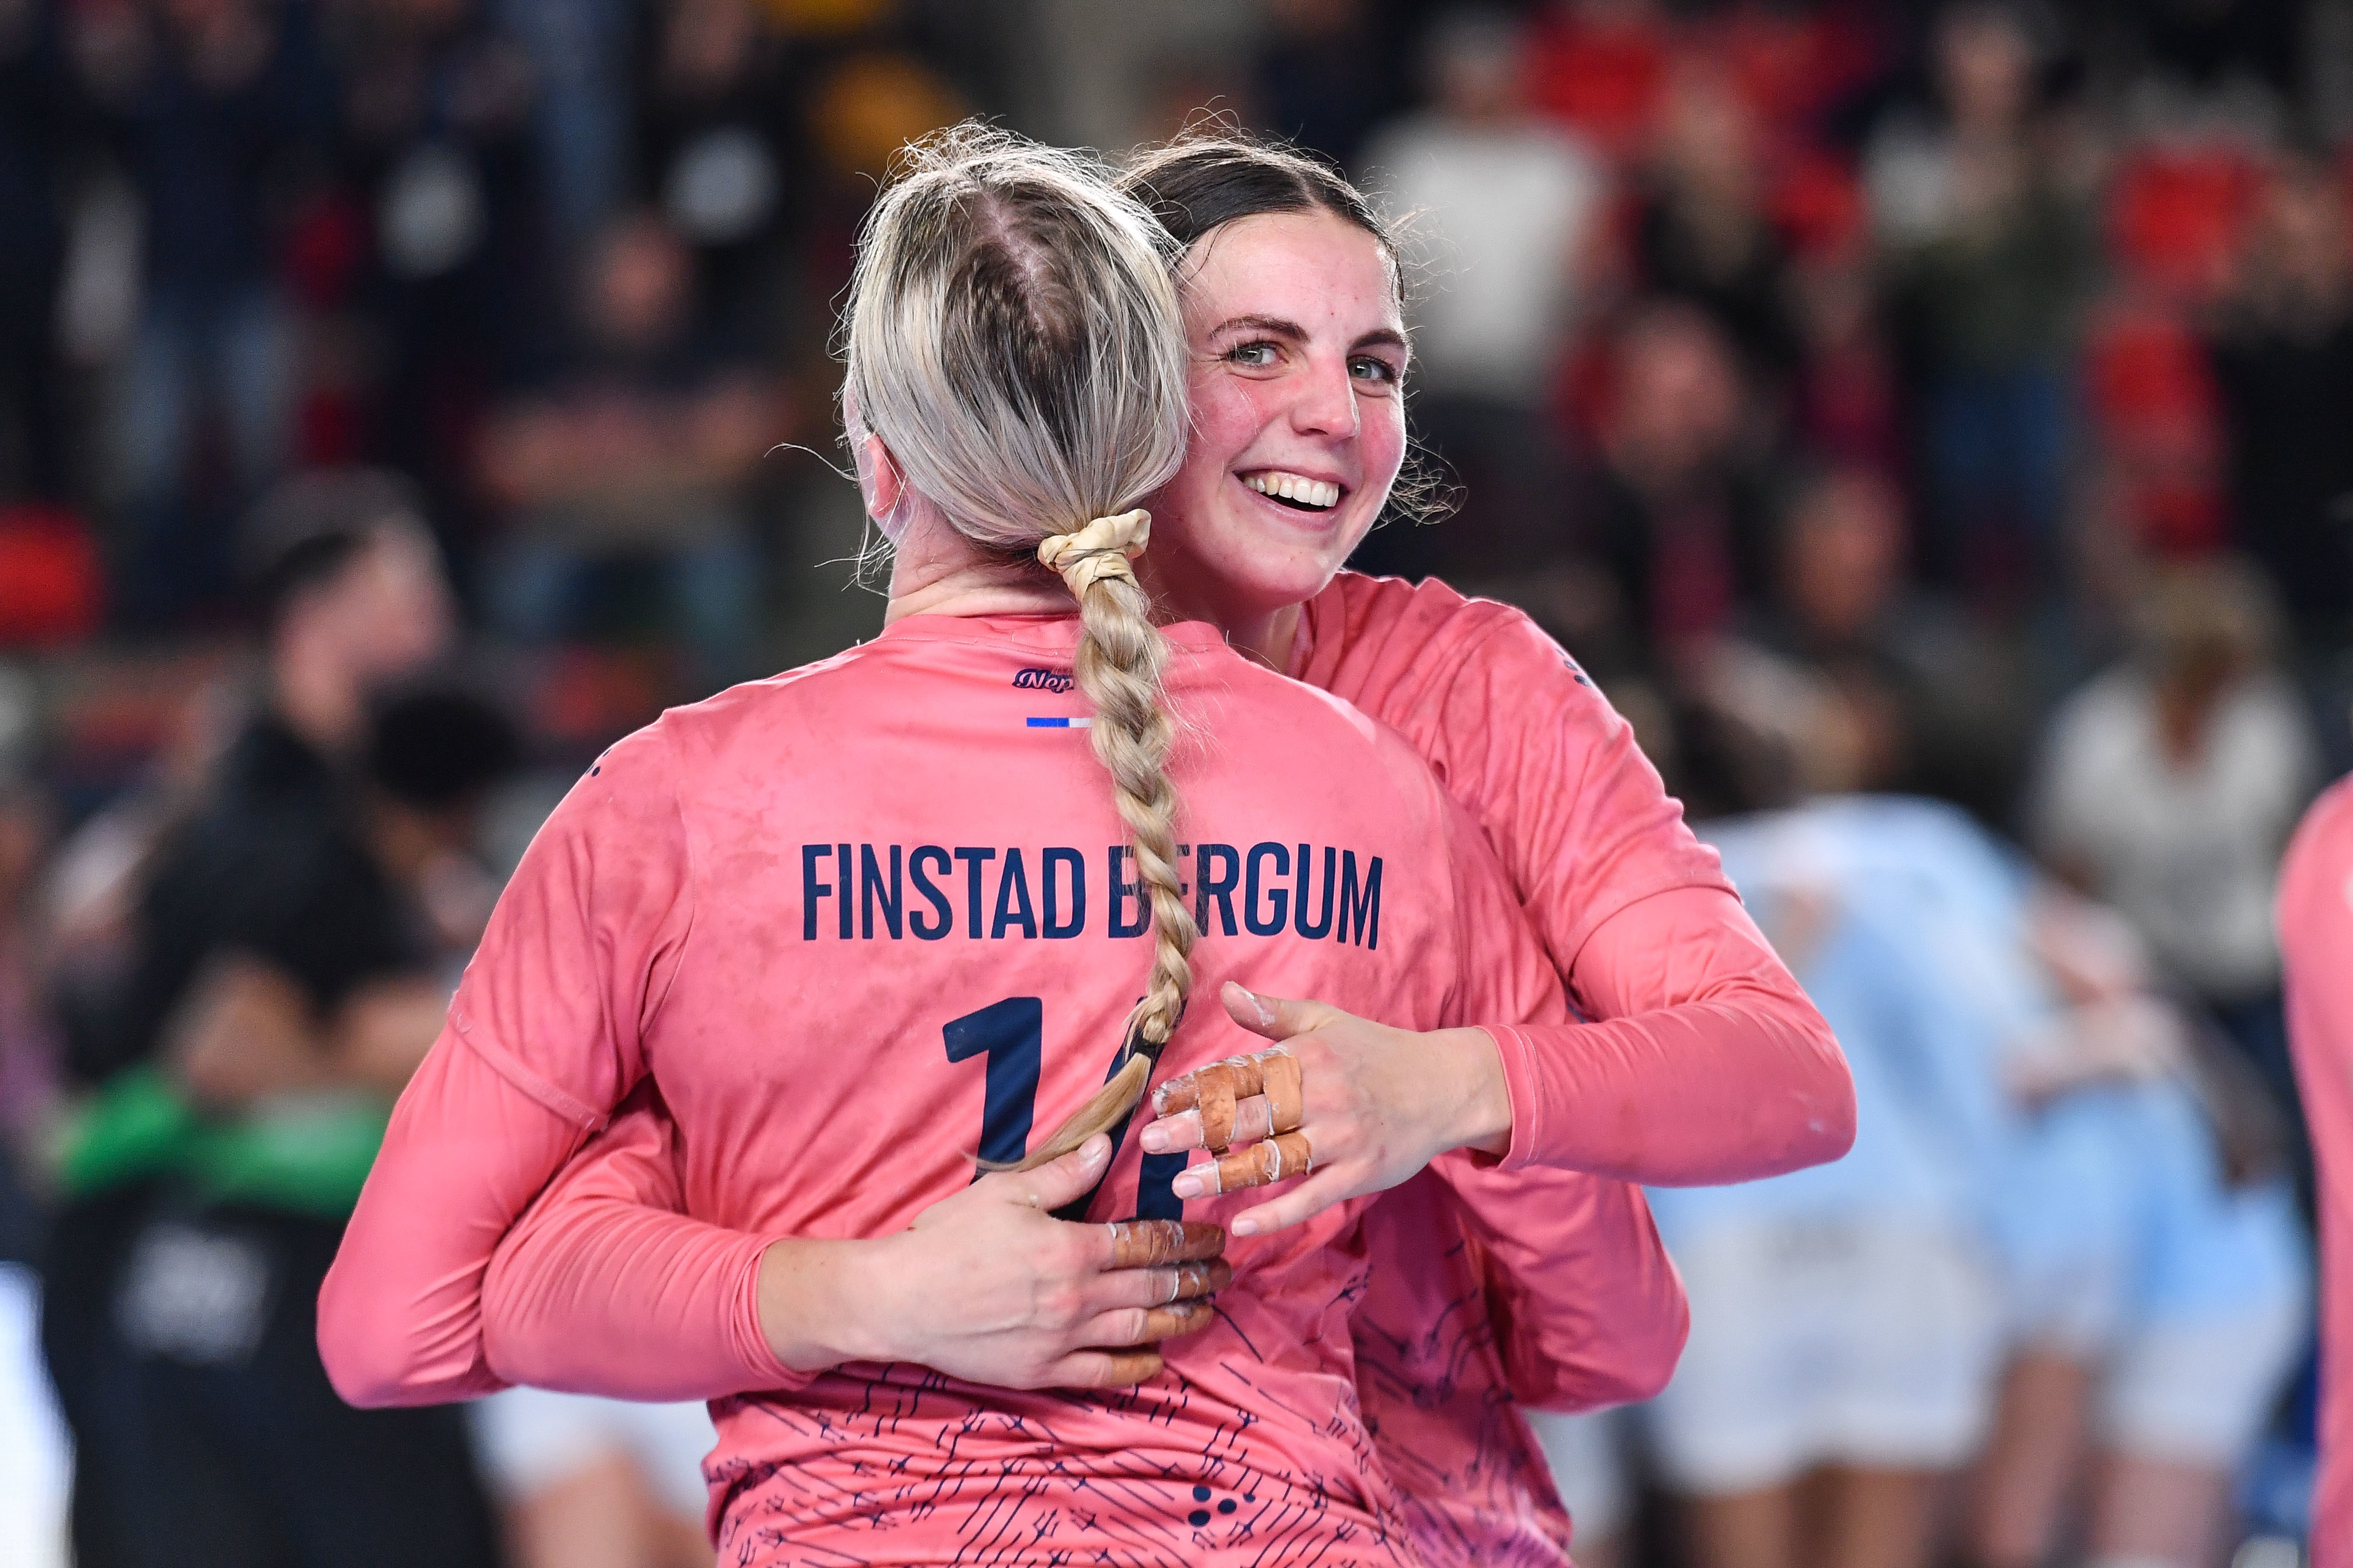 Carin STROMBERG of Nantes and Mari FINSTAD BERGUM of Nantes during the Ligue Butaguaz Energie match between Nantes and Paris92 on March 20, 2022 in Nantes, France. (Photo by Franco Arland/Icon Sport)